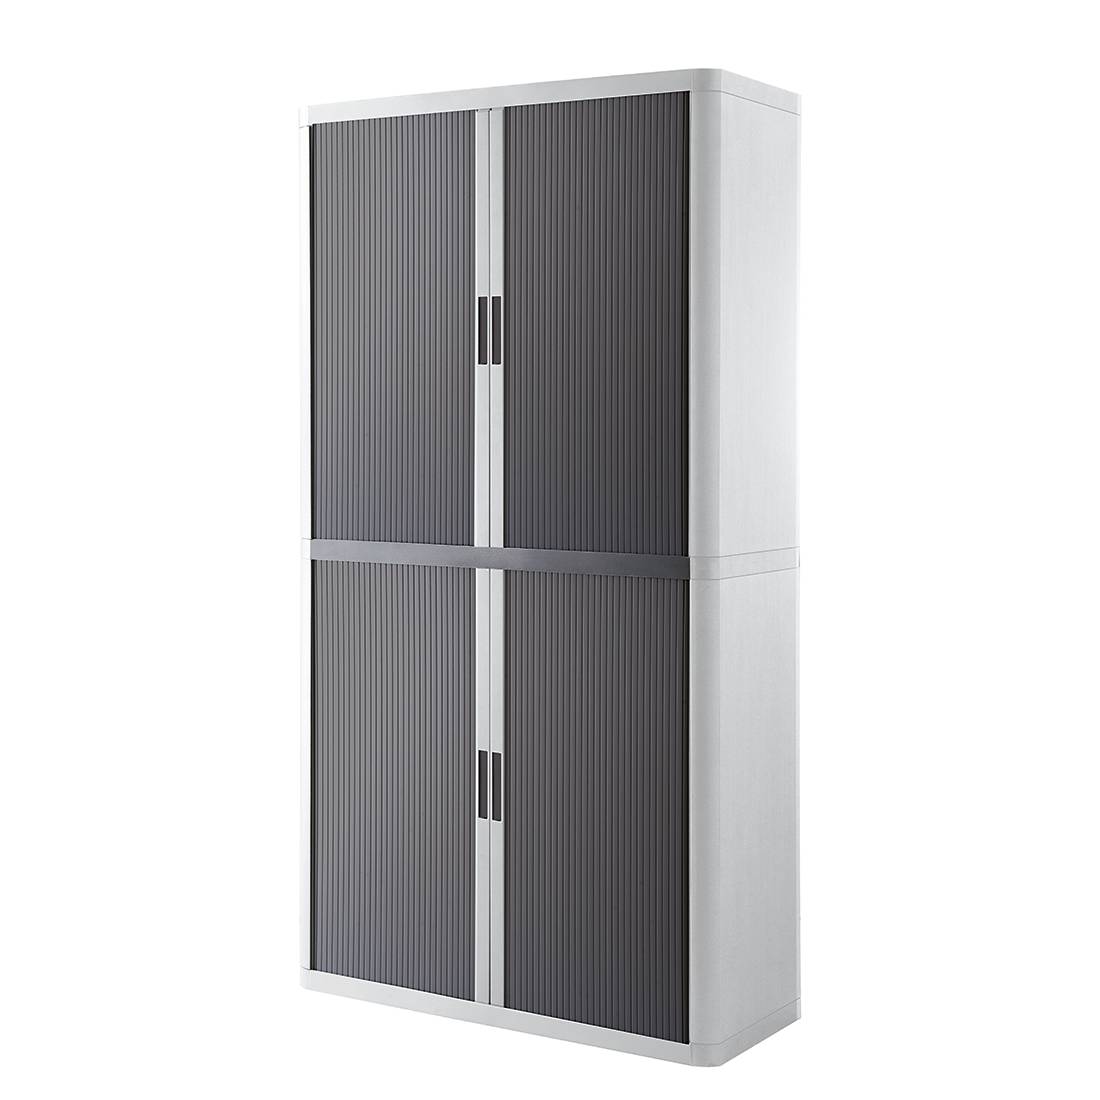 Image of Armoire à dossiers easyOffice 000000001000071302